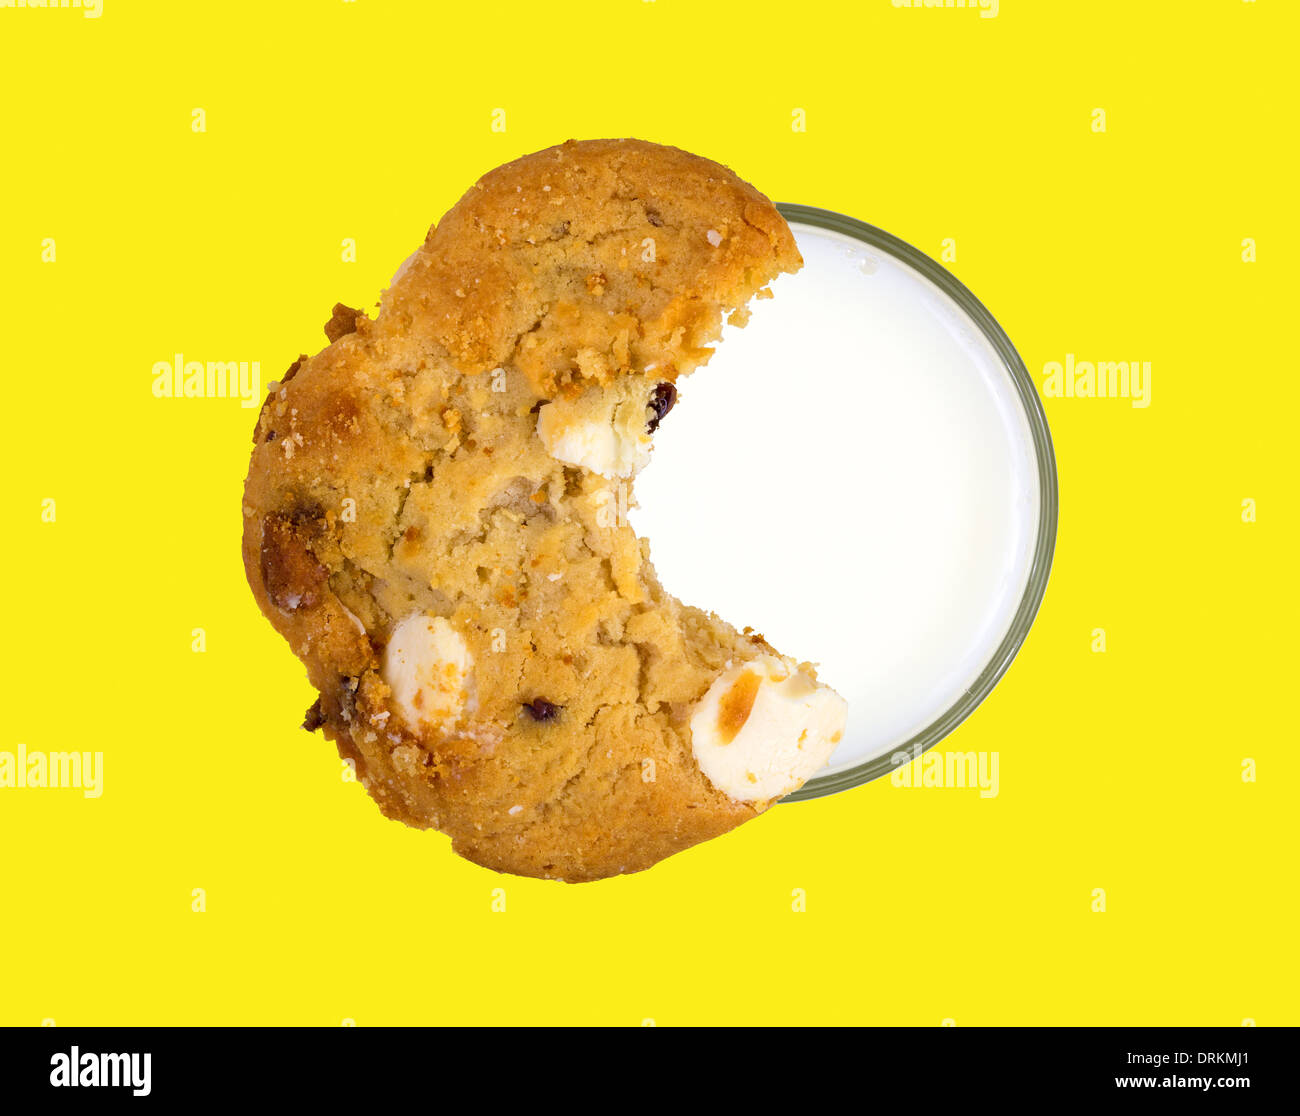 Top view of a cookie on the rim of a glass filled with skim milk on a bright yellow background. Stock Photo